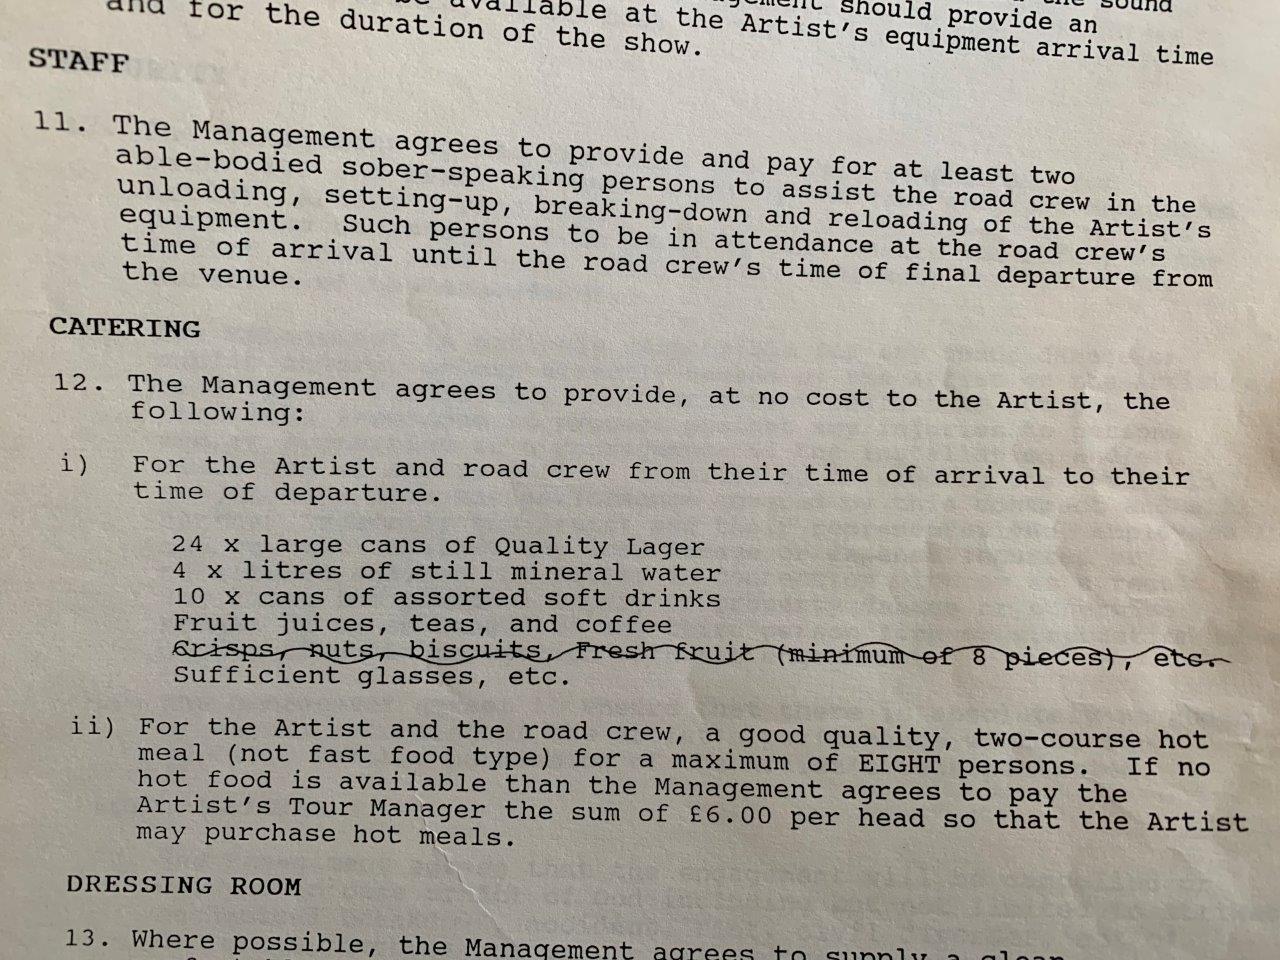 An extremely rare Oasis gig contract requesting &#8216;sober-speaking&#8217; staff is going to auction, The Manc